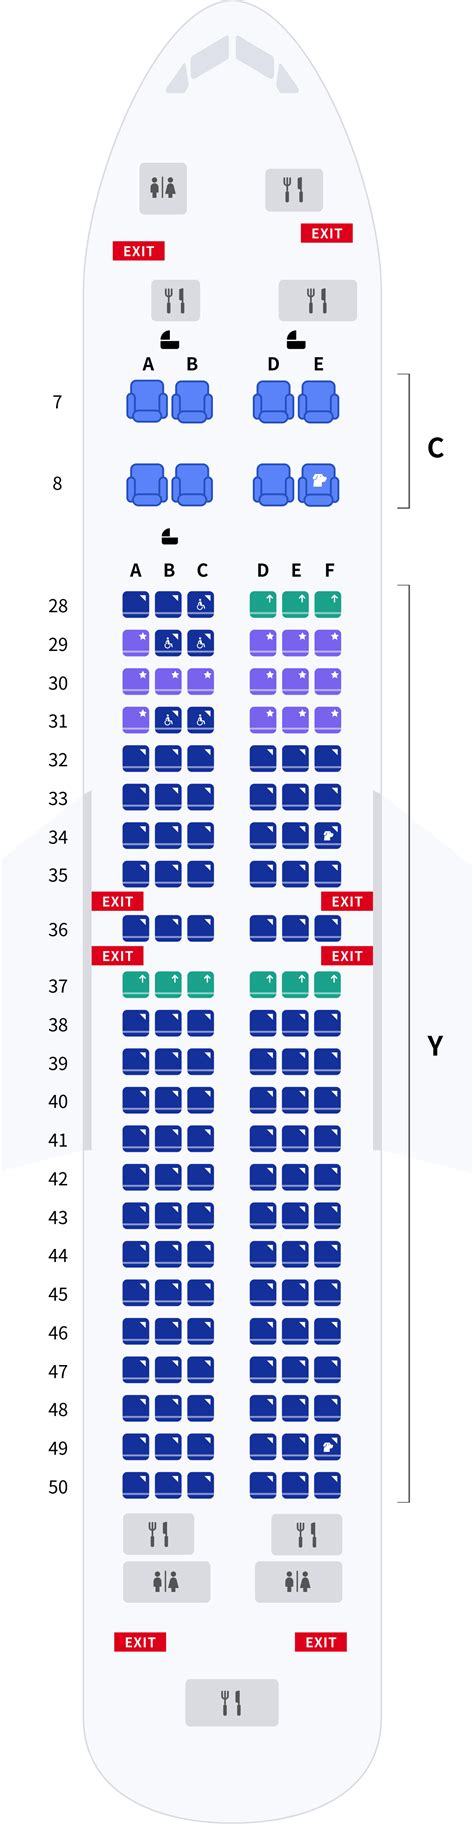 boeing 737 max 8 seating chart